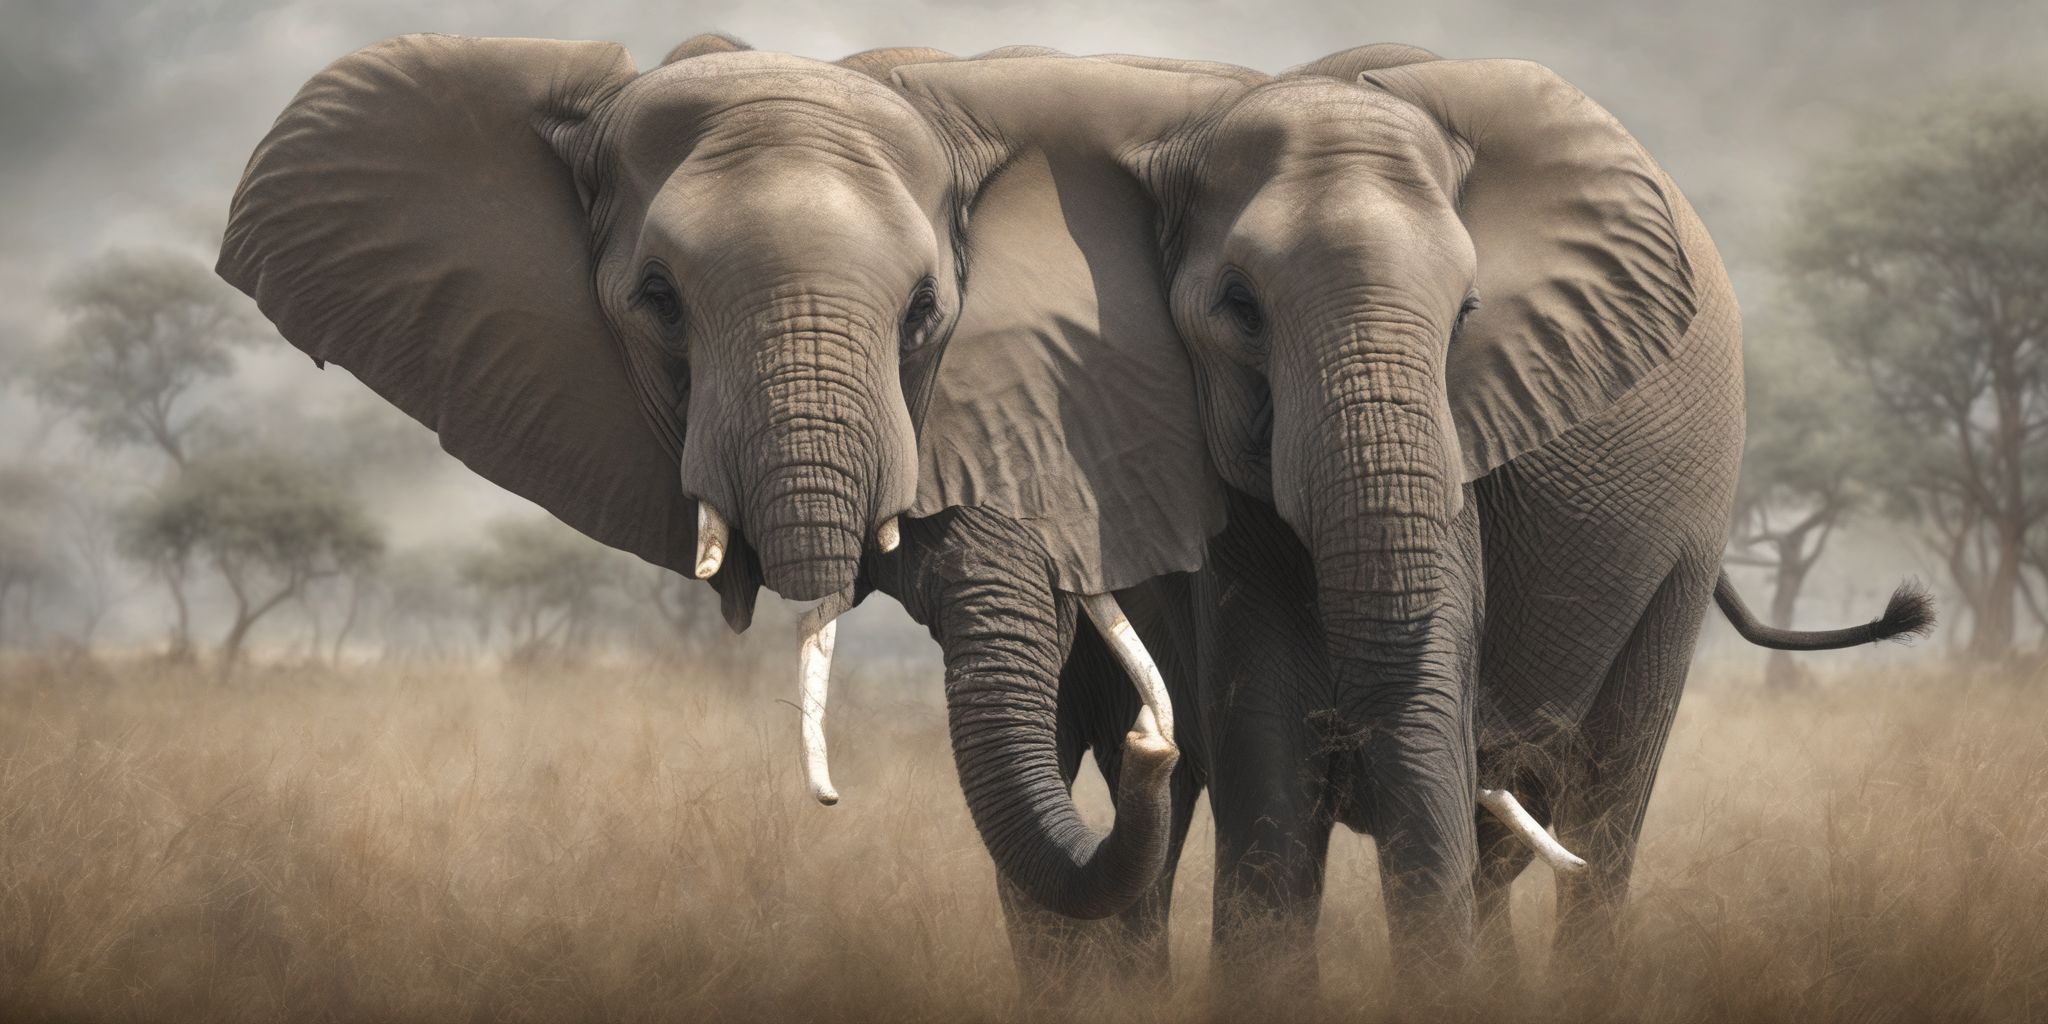 Elephant: Large  in realistic, photographic style